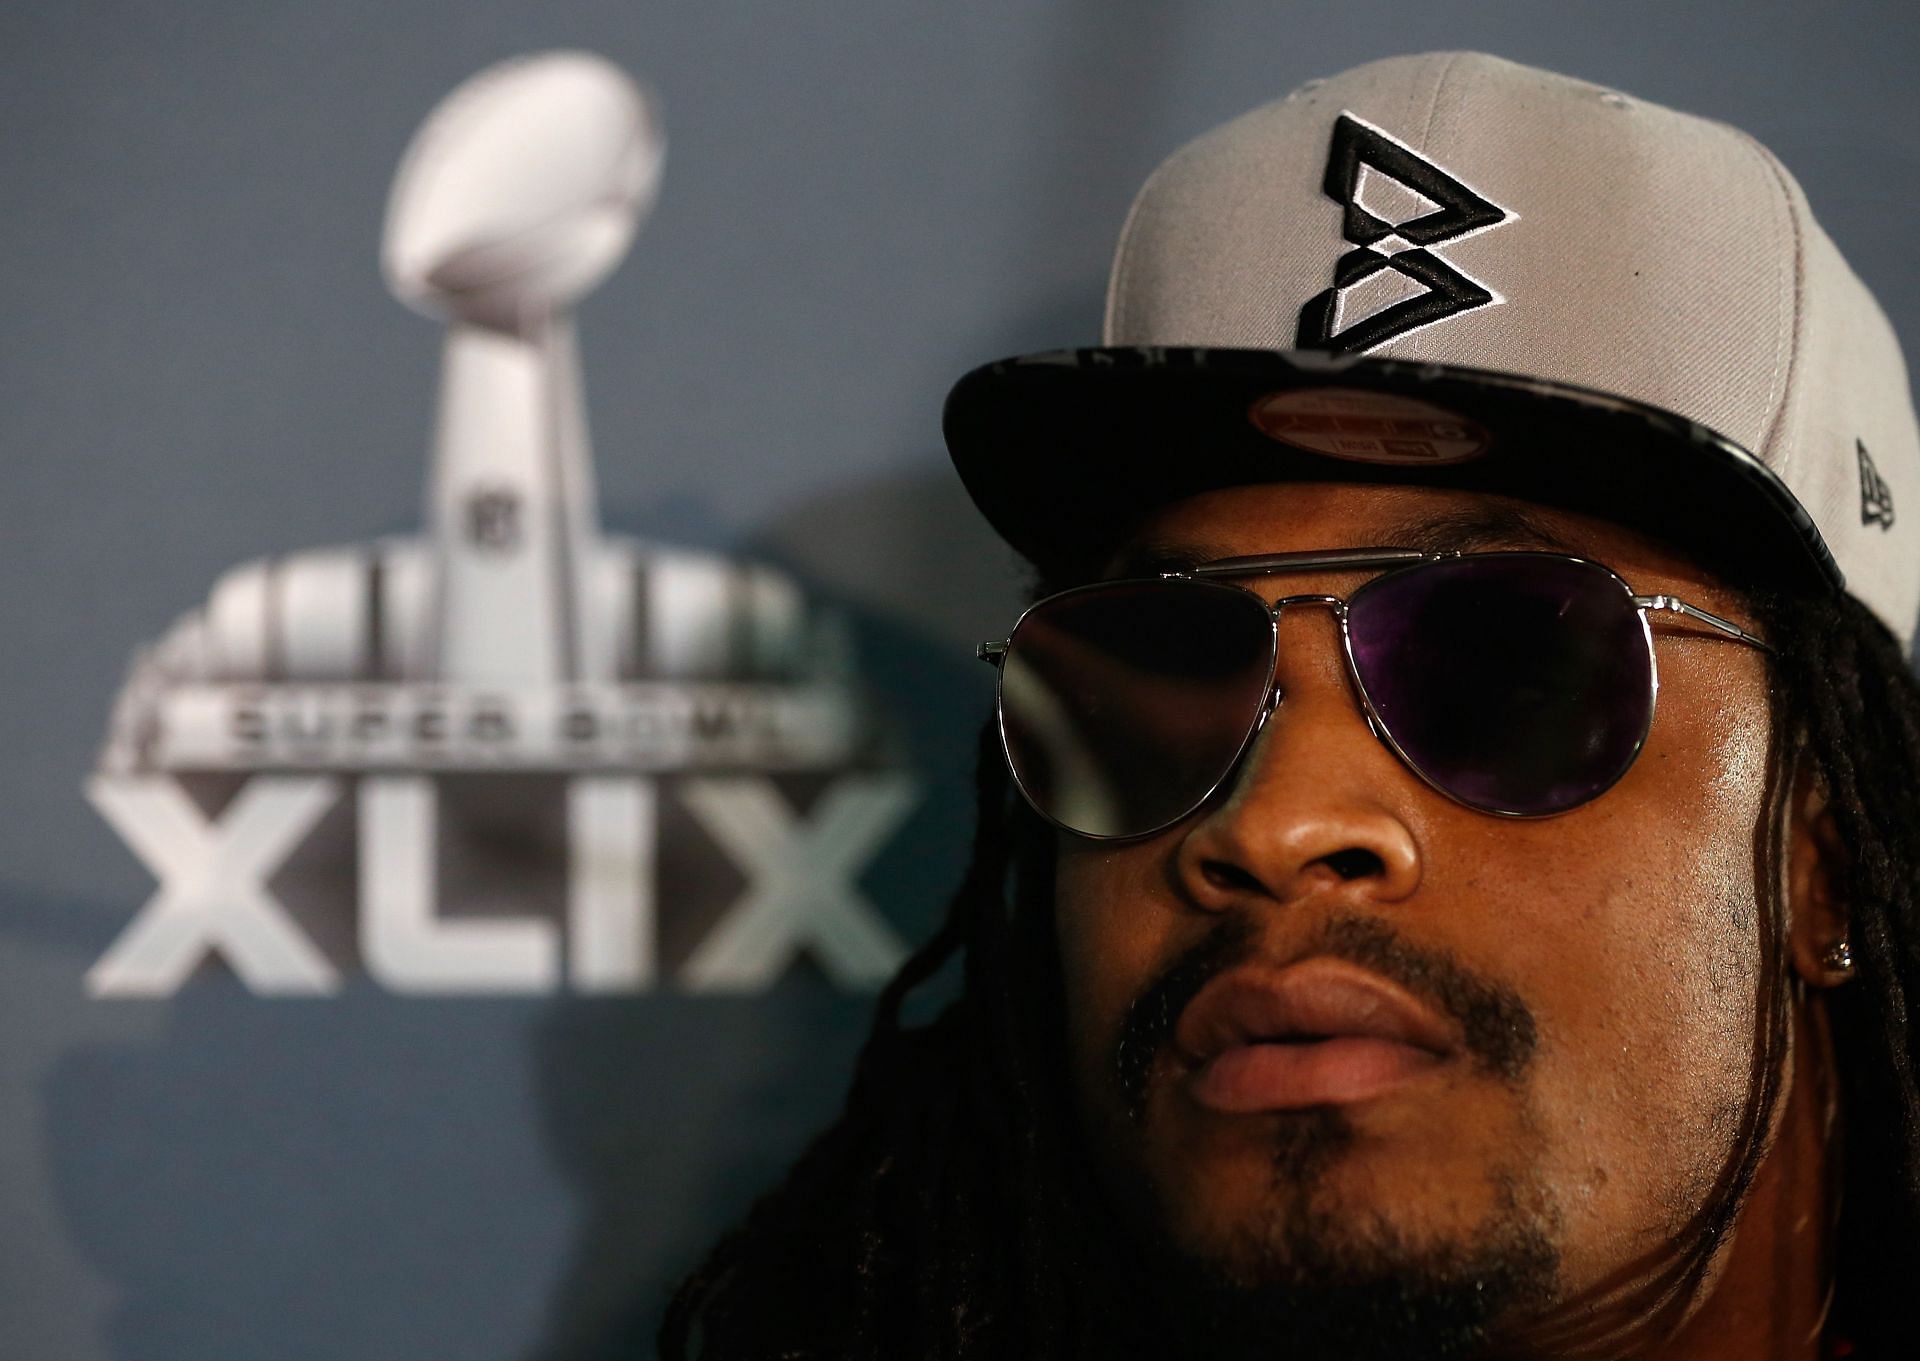 Former Seattle Seahawks and Oakland Raiders running back Marshawn Lynch was arrested on DUI in Las Vegas